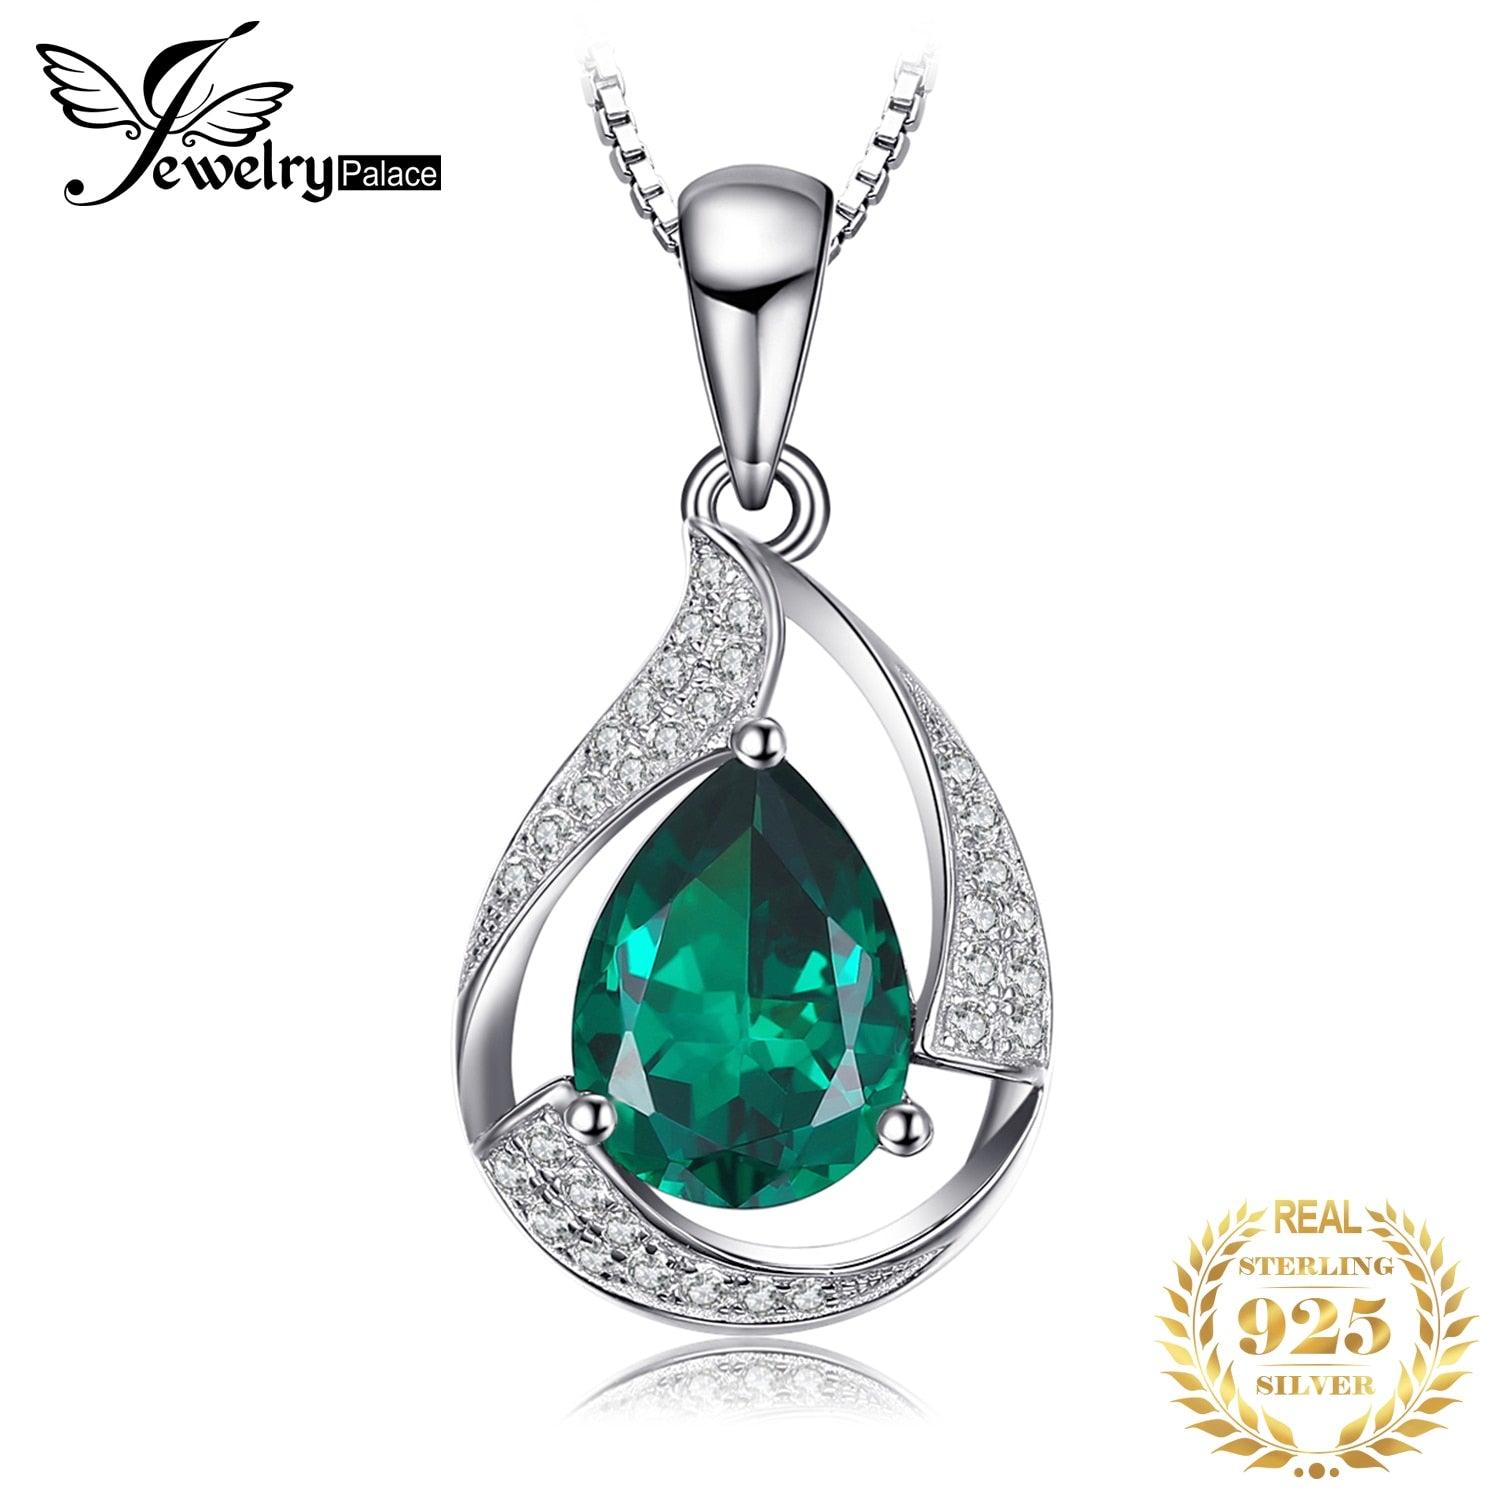 JewelryPalace 3ct Green Simulated Nano Emerald 925 Sterling Silver Pendant Necklace for Women Pear Gemstones Choker No Chain